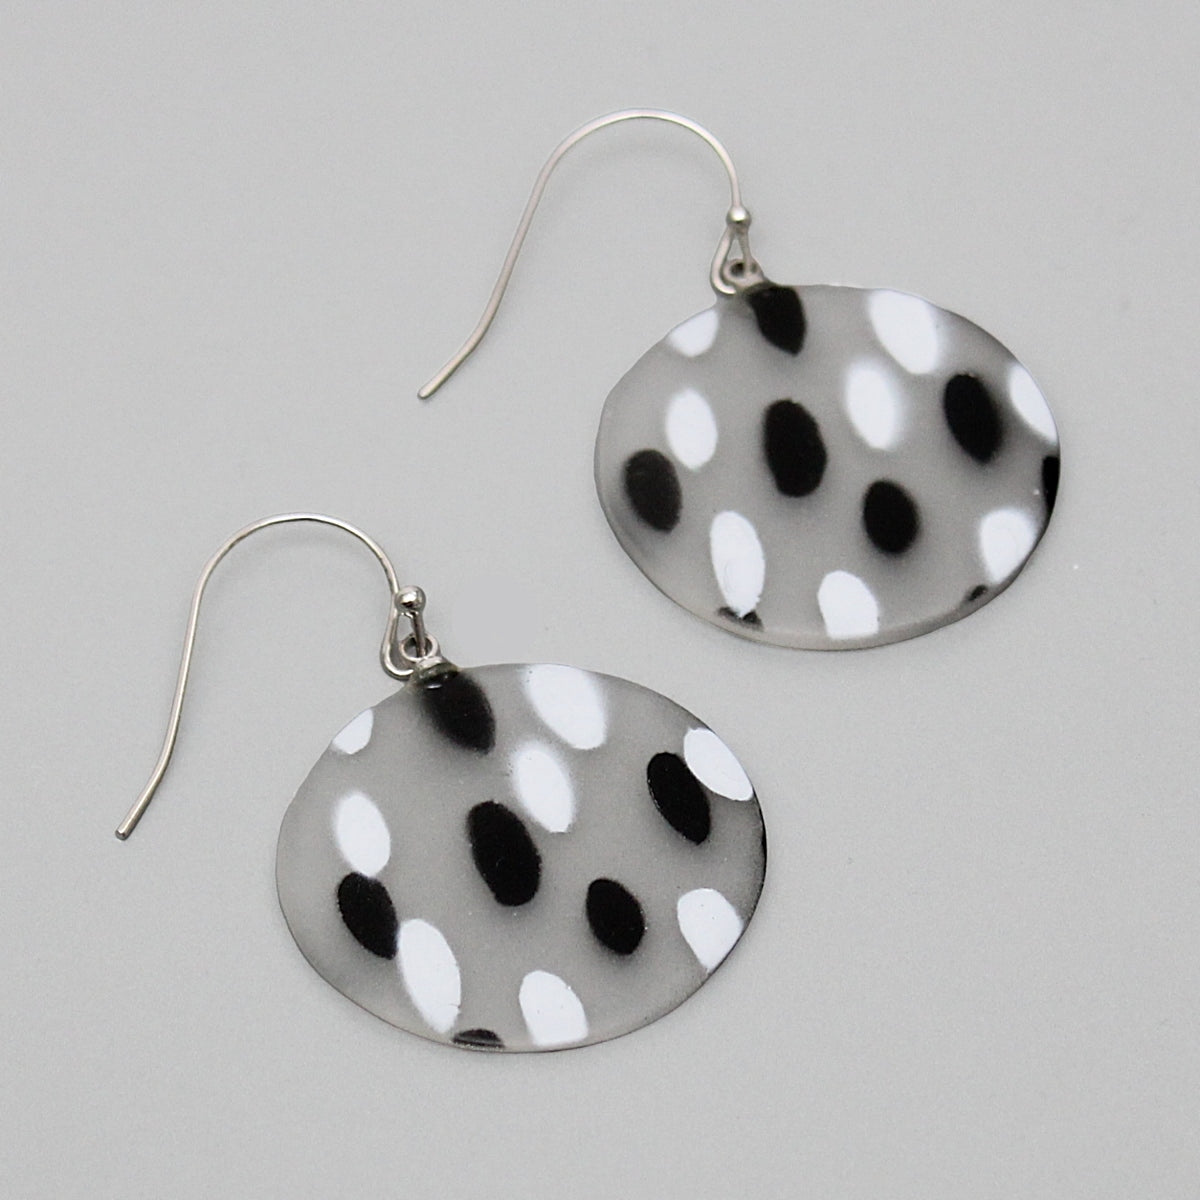 Black and White Frosted Marissa Earrings